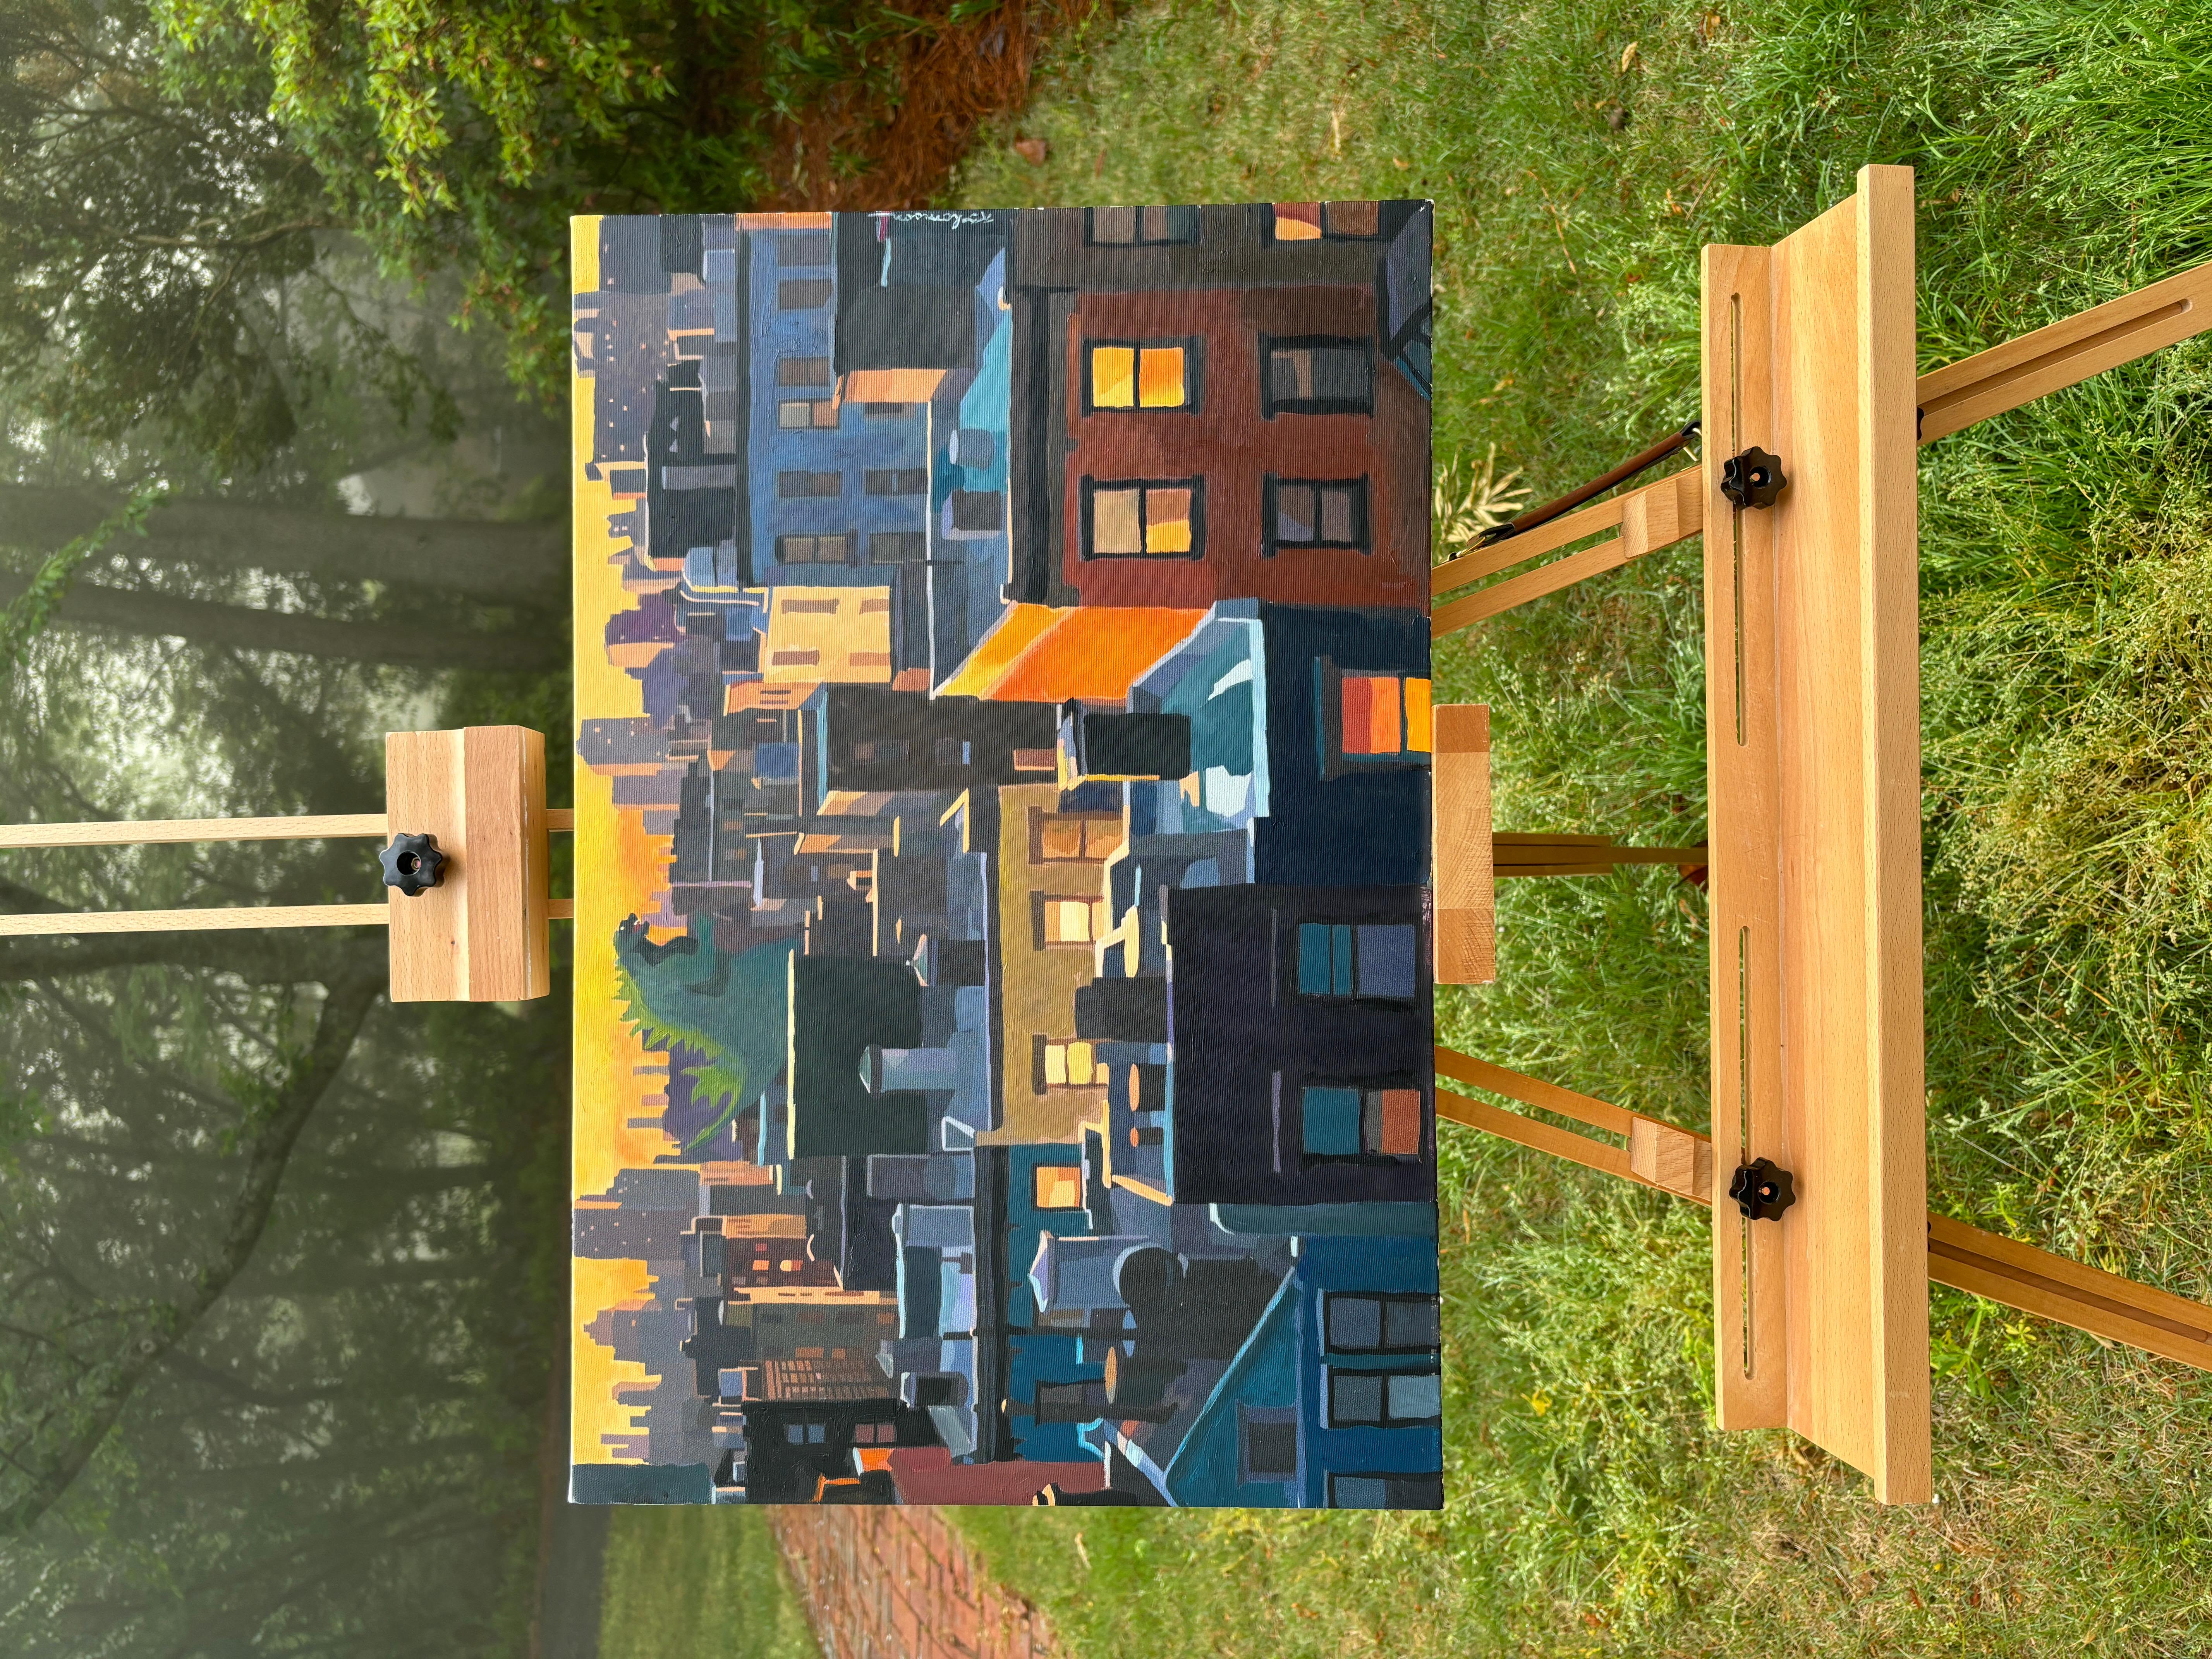 <p>Artist Comments<br>The painting captures a tranquil morning in Brooklyn, depicting buildings with sharp angles and block shapes. It is a straightforward cityscape, except for Godzilla roaming the street, injecting an unexpected element into the